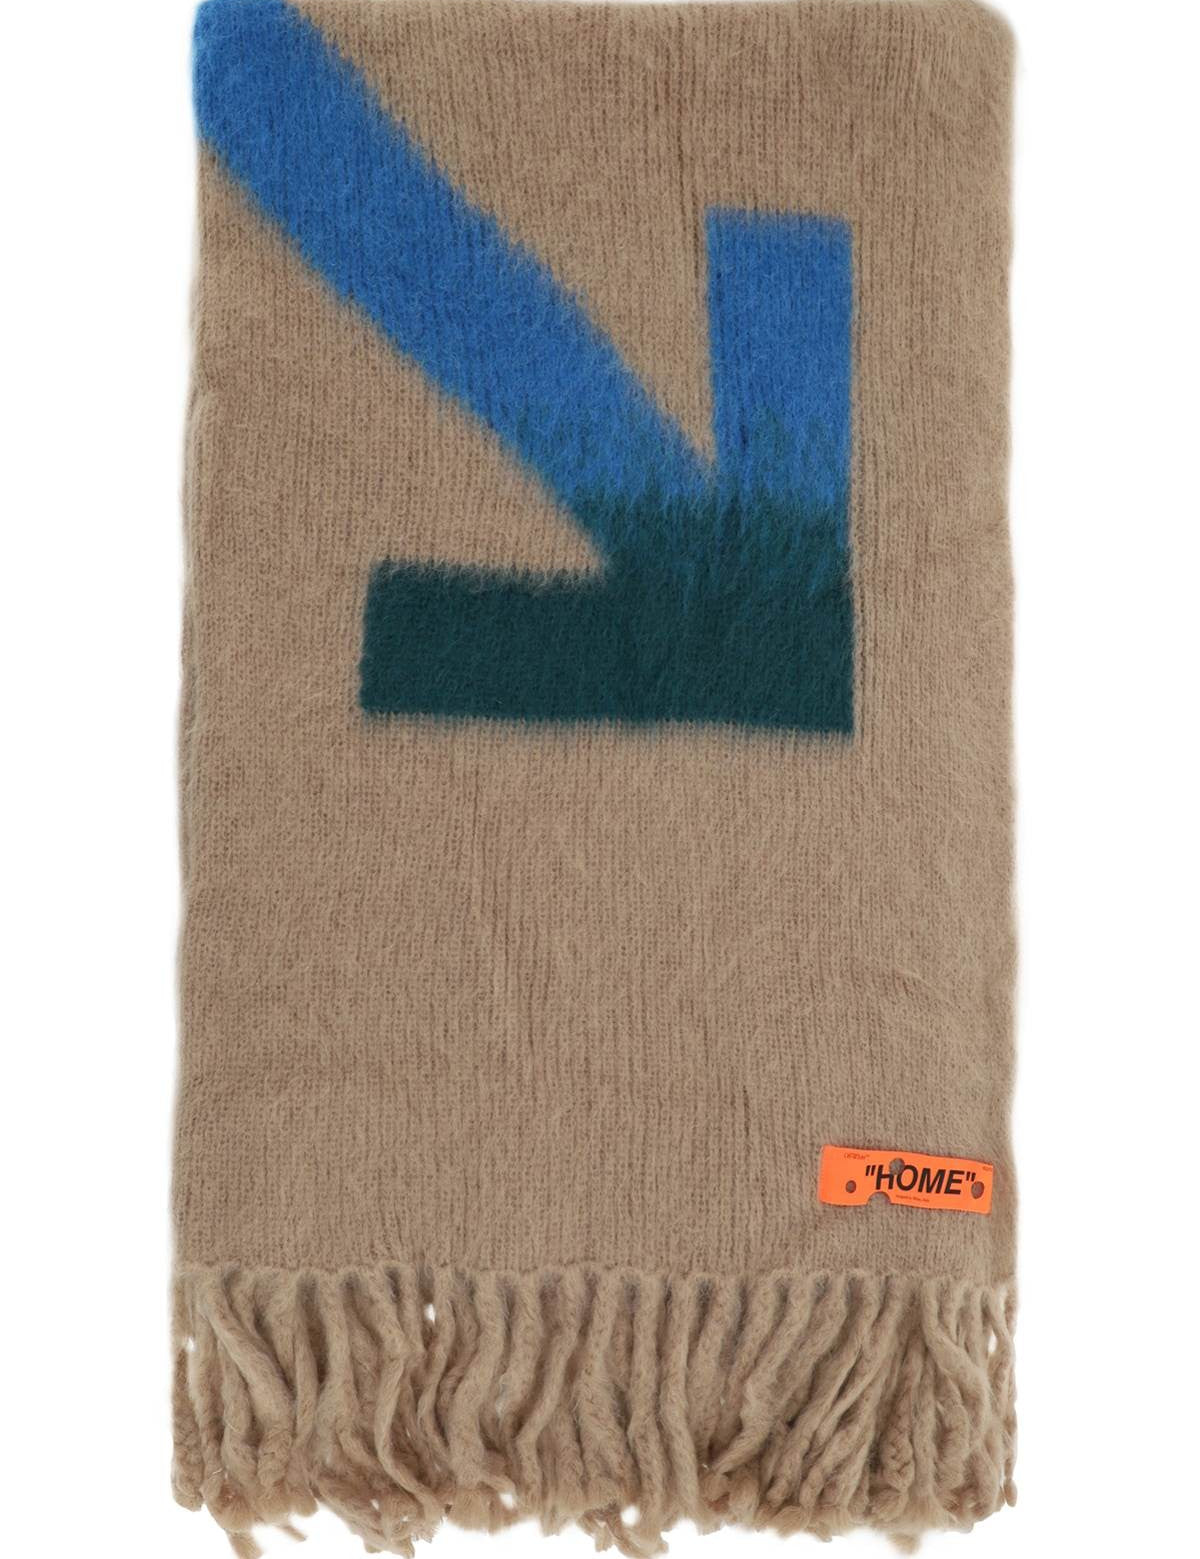 off-white-arrows-mohair-and-wool-blanket.jpg